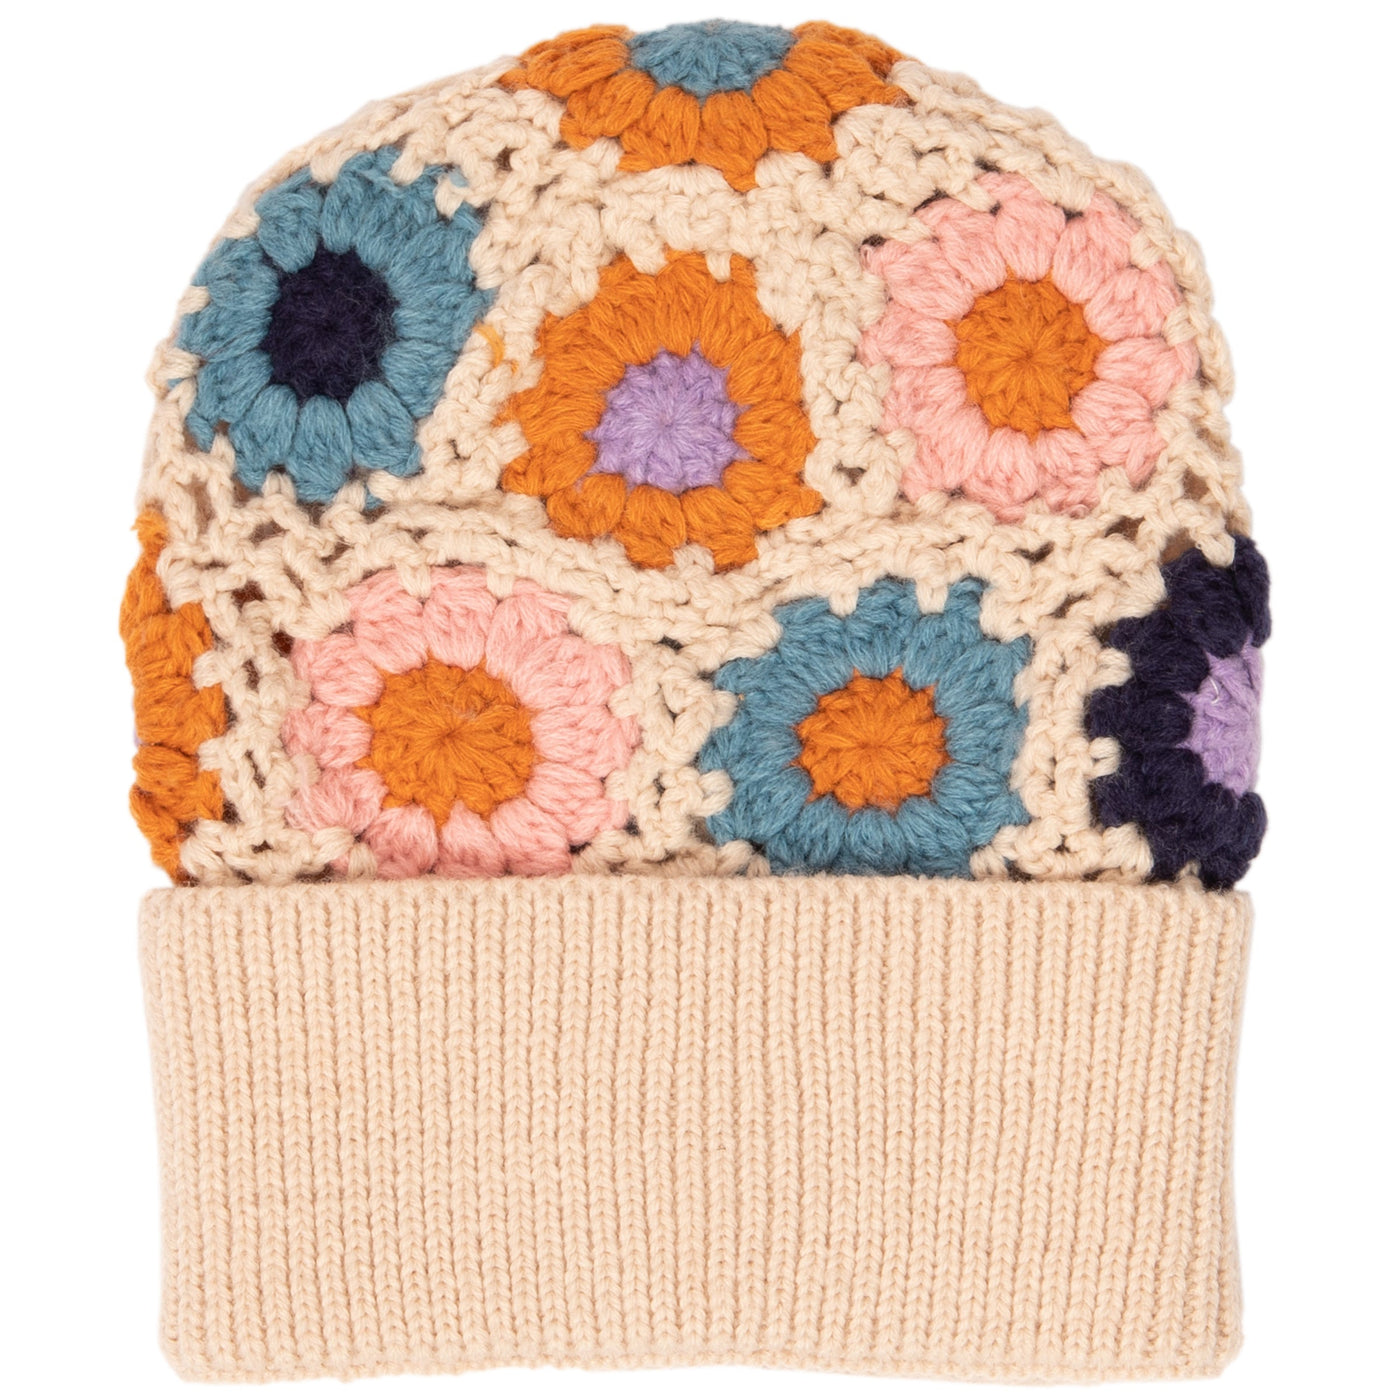 BEANIE - Maybelle - Granny Square Knit Cuff Beanie